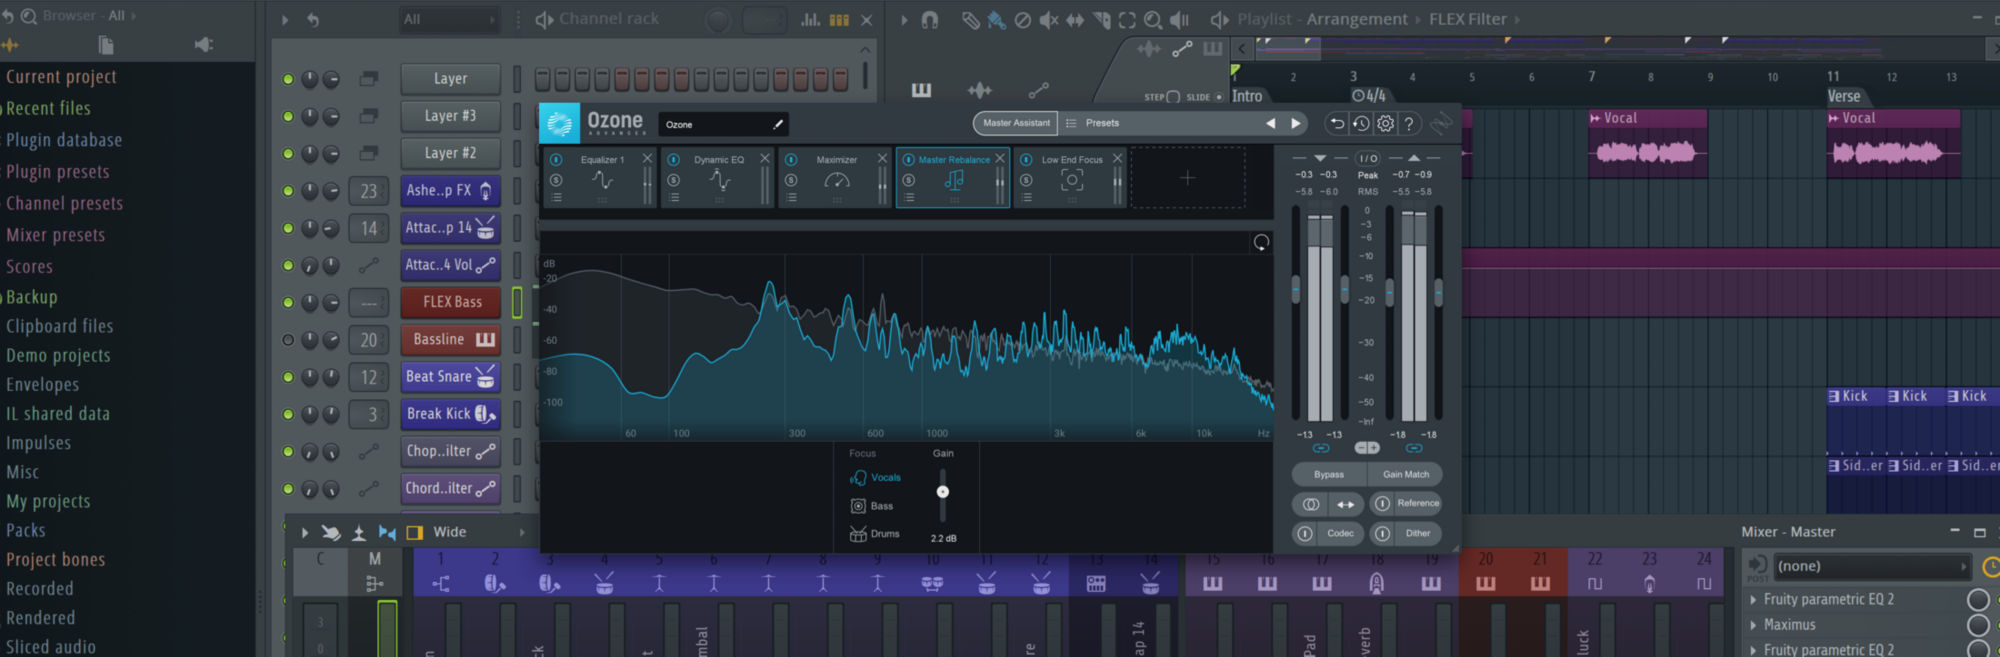 mastering a song in fl studio